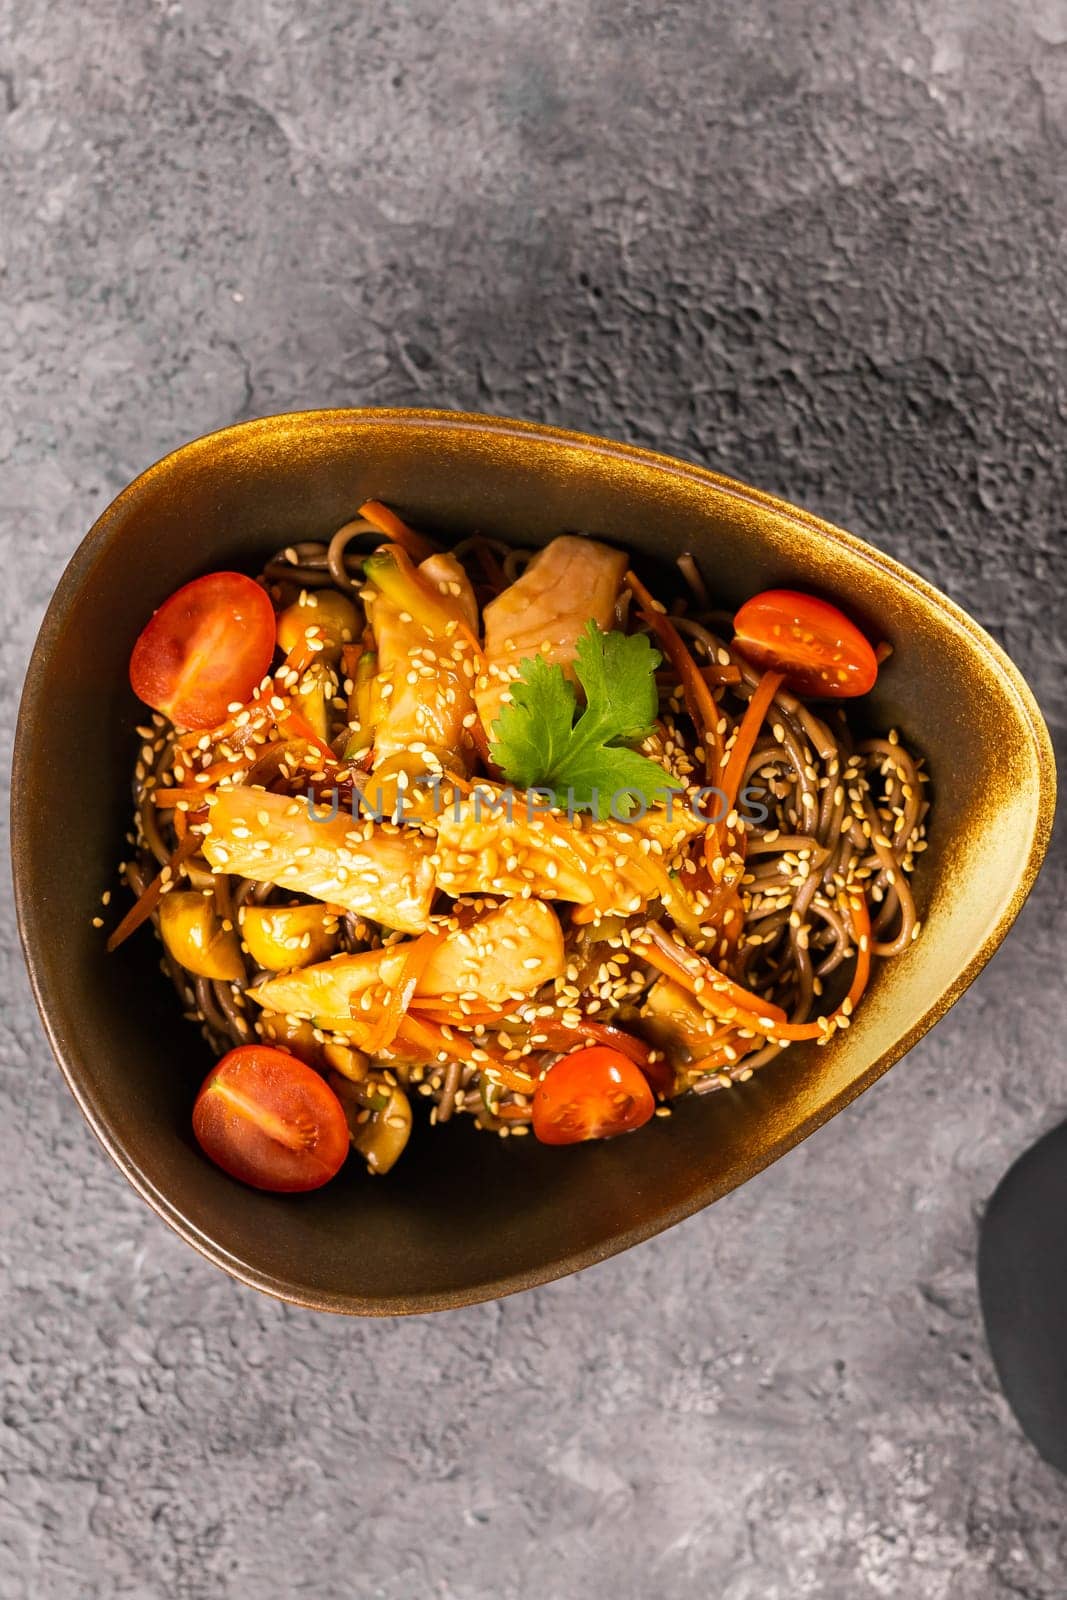 Udon stir-fry noodles with salmon and vegetables. Asian cuisine by Satura86